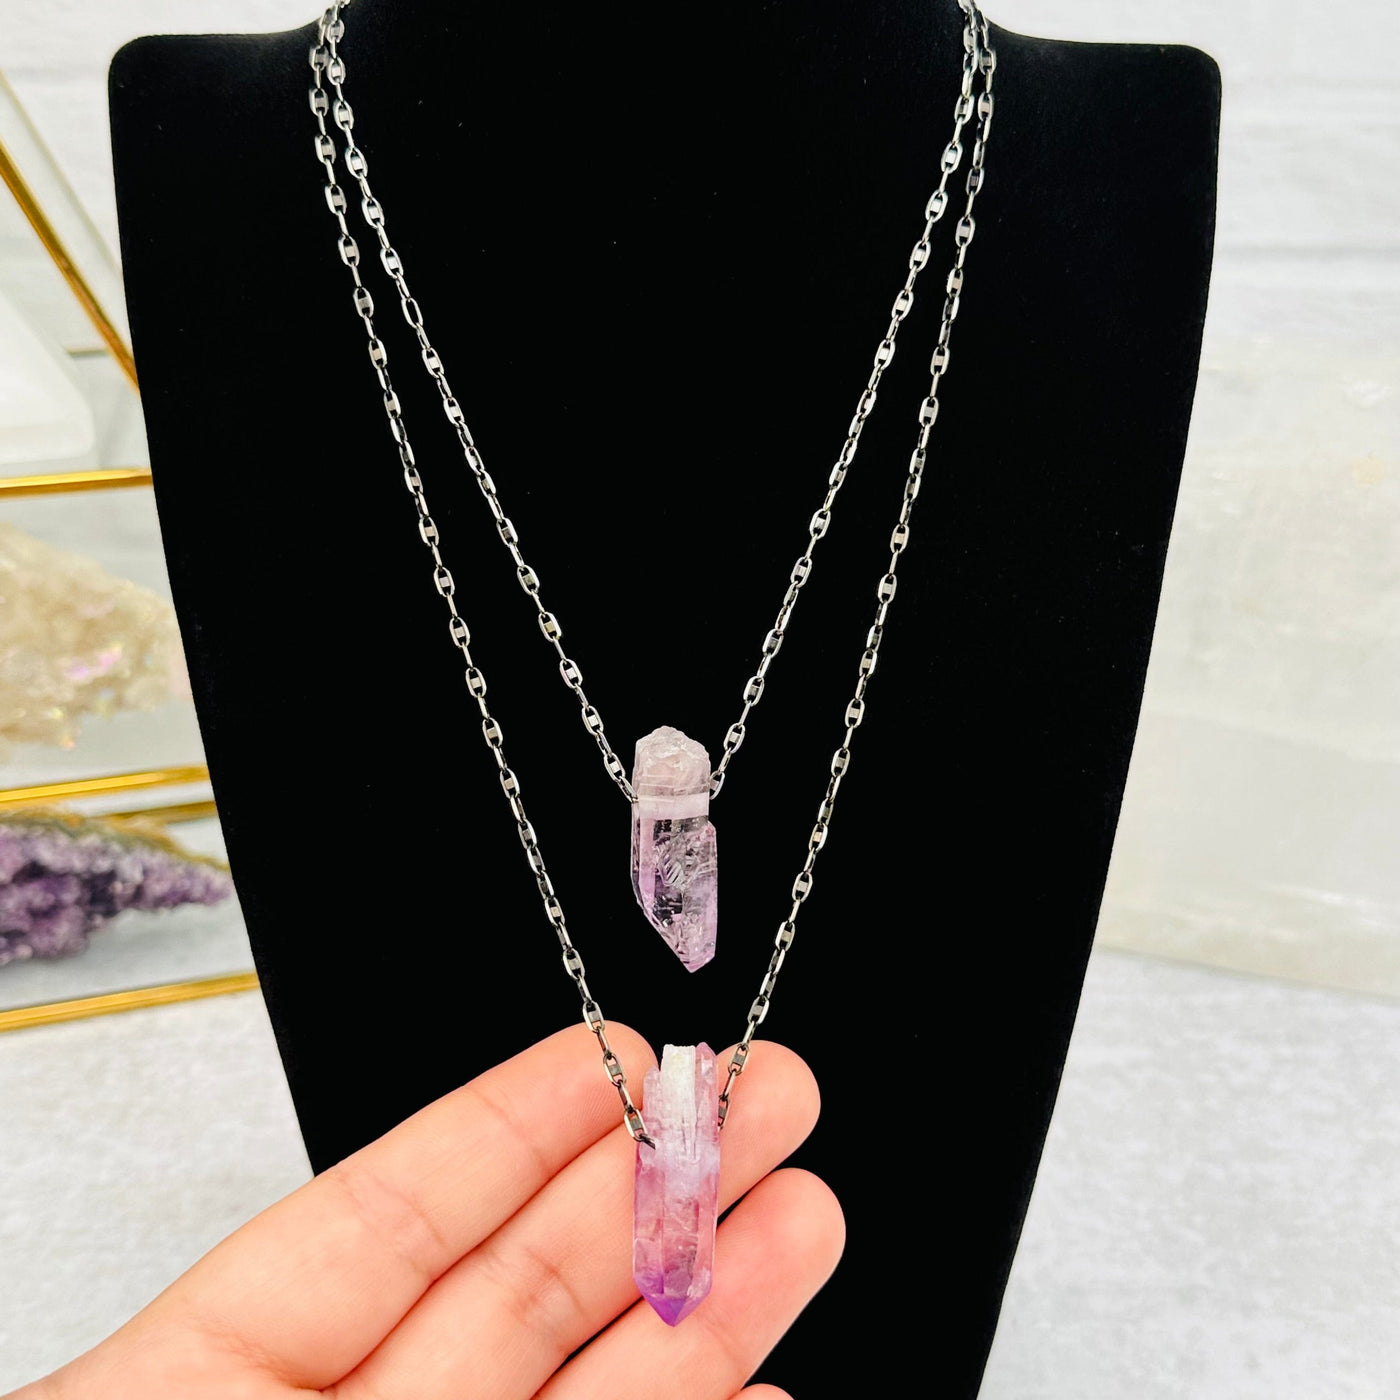 Veracruz Amethyst pendants in hand for size reference 